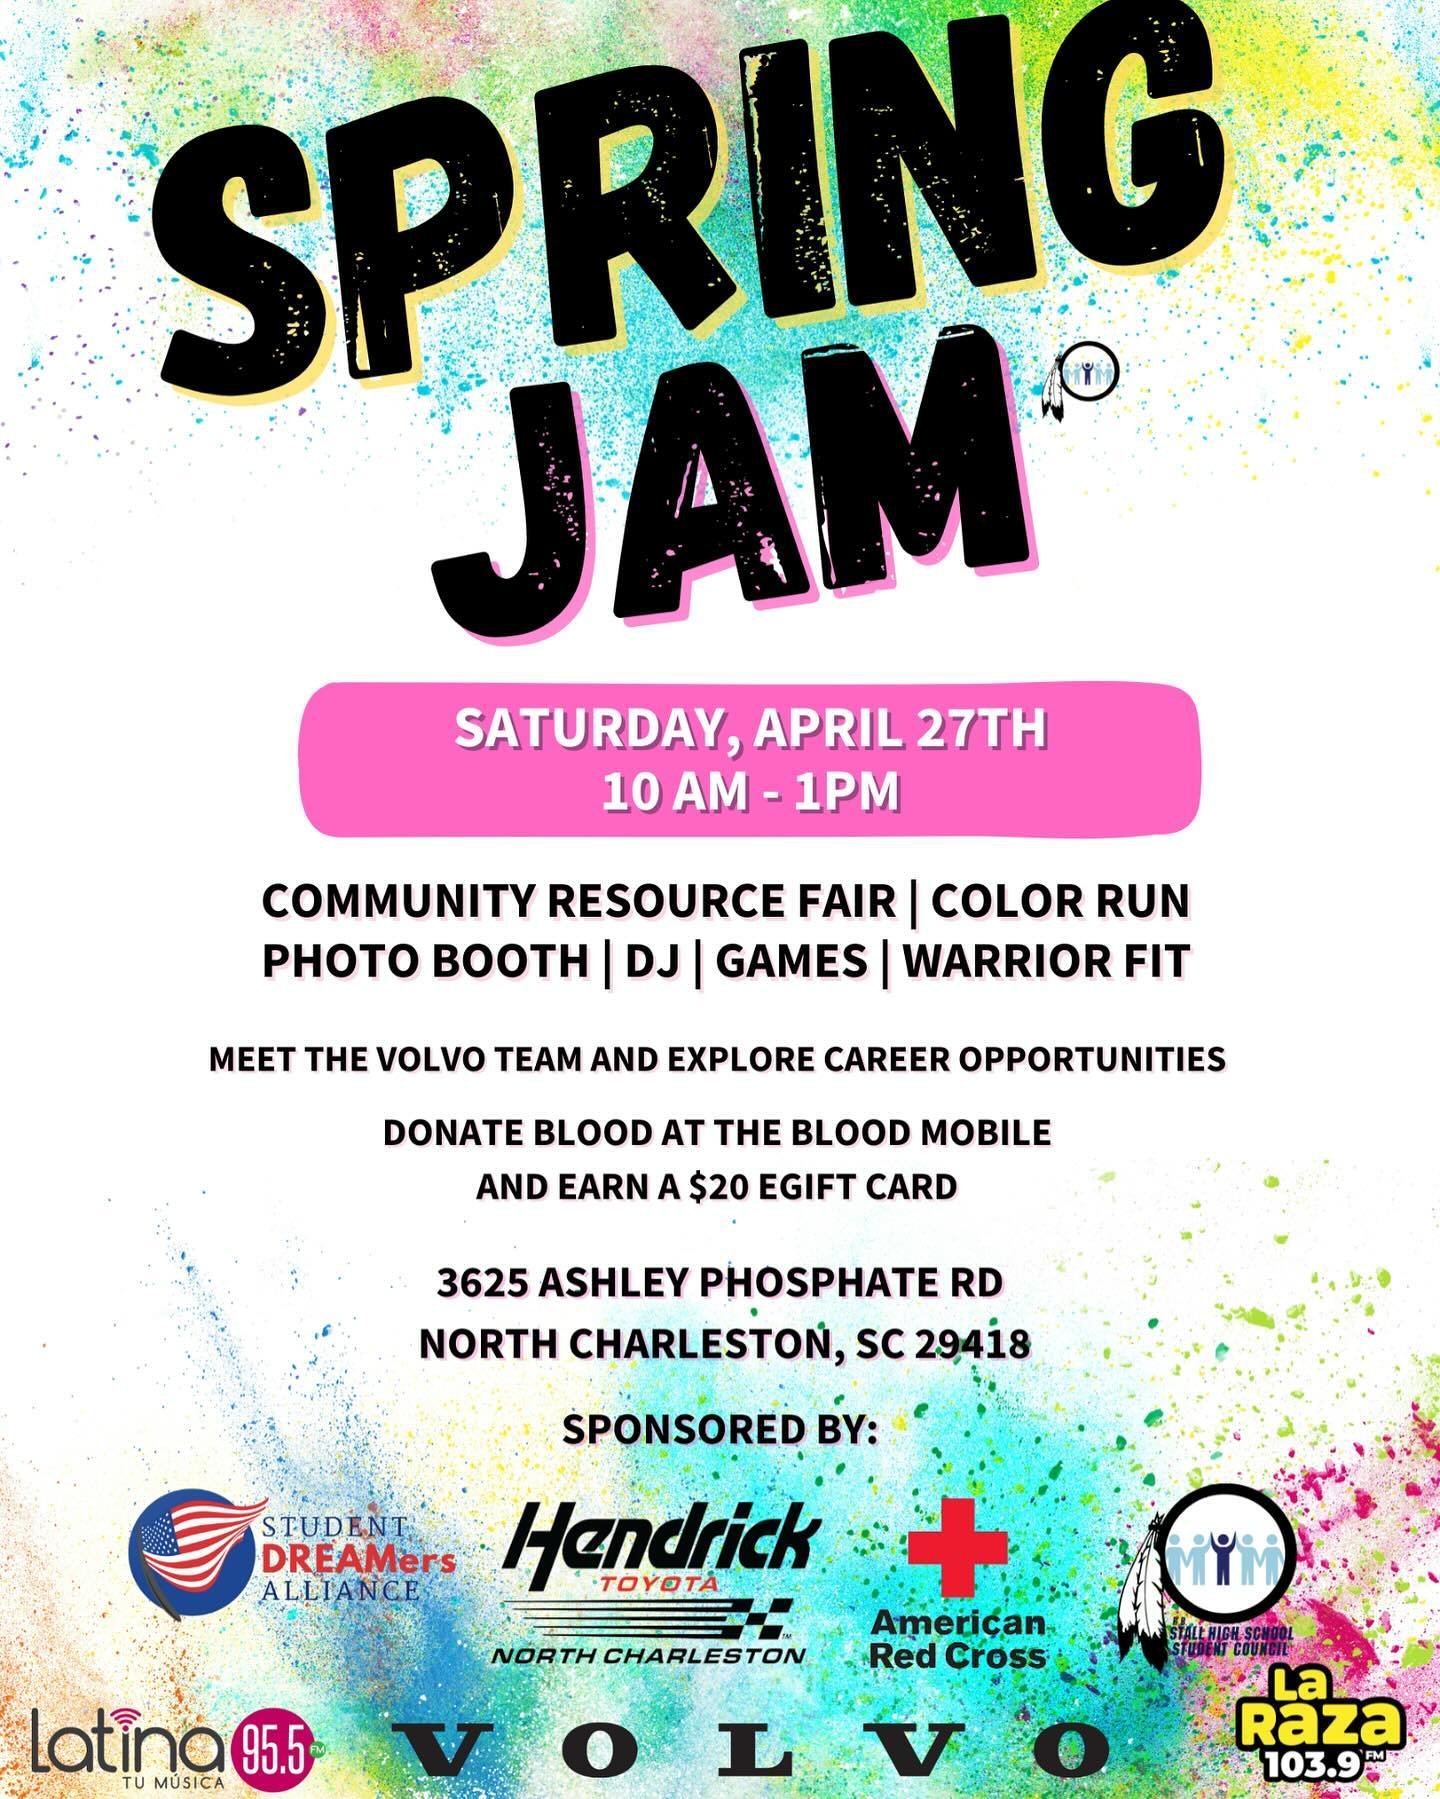 Come hang with us this weekend! 

🌸 Saturday we will be at the R.B. Spring Jam &amp; Resource Fair. This event is part of the Student Dreamers Alliance end of year service project and is sure to be a really fun day of community activities and import